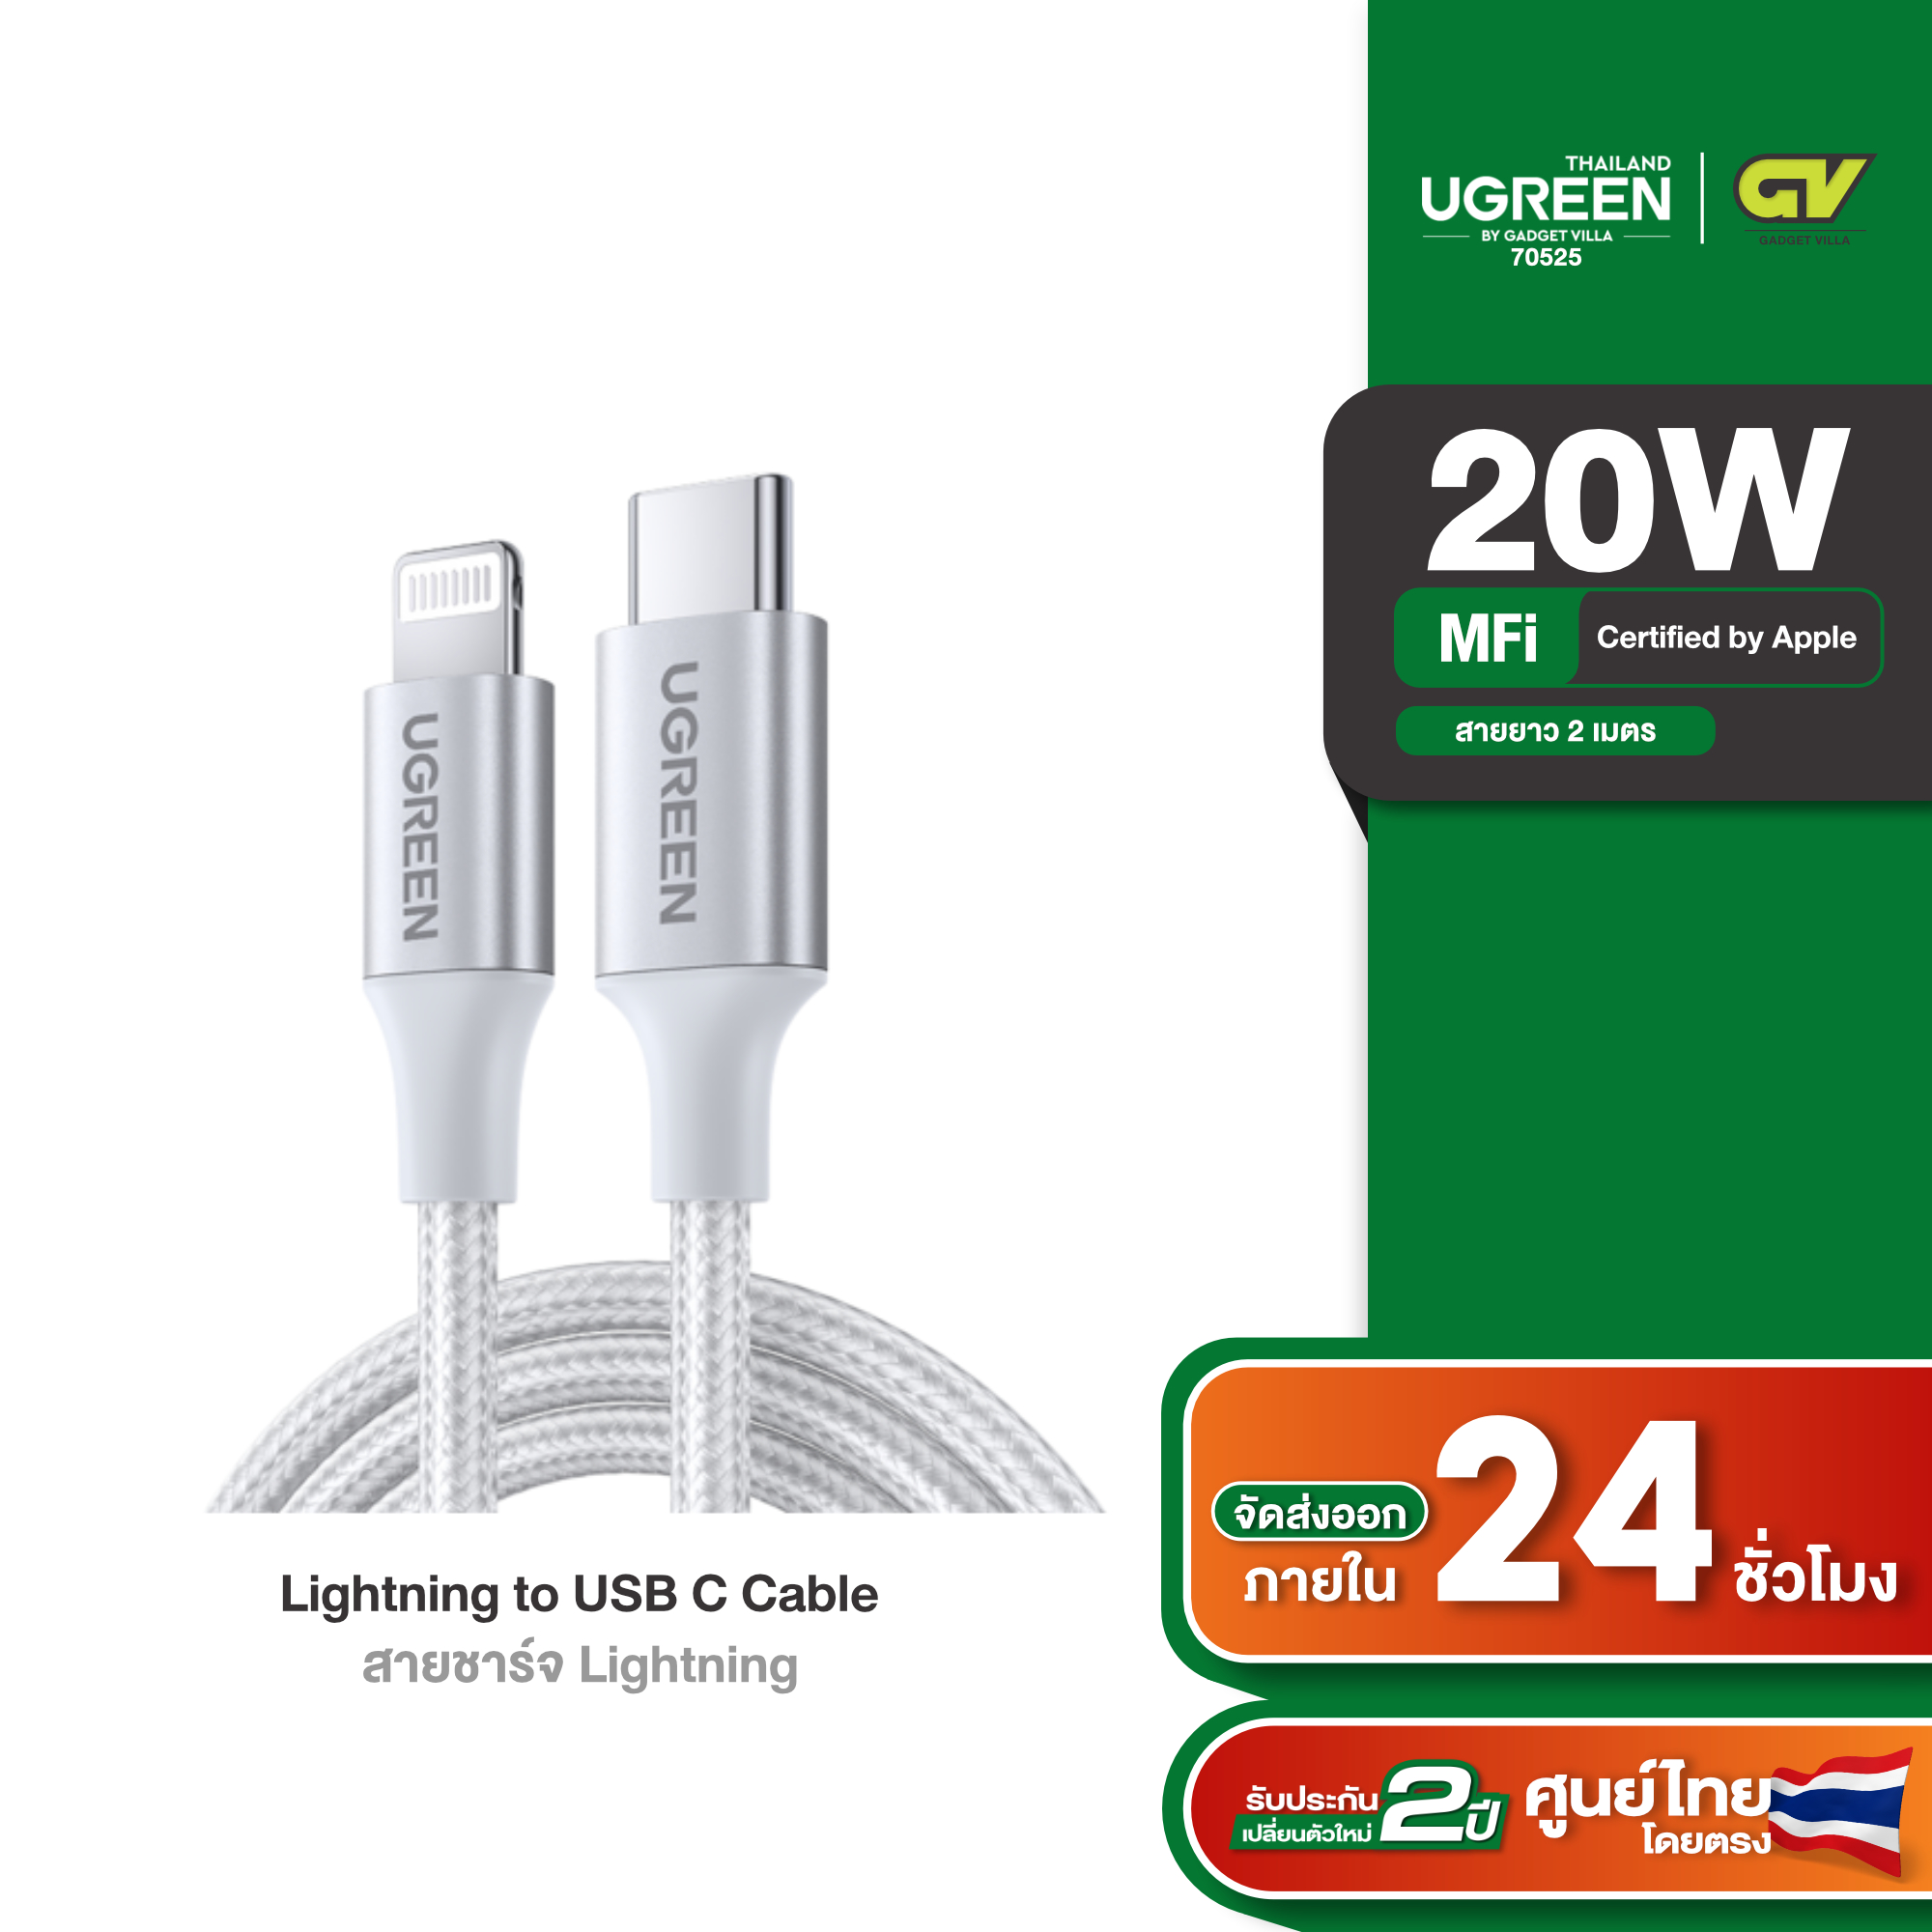 UGREEN รุ่น US304 USB C to Lightning Cable - MFi Certification Lightning Cable Compatible with iPhone 14/14 Pro/14 Pro Max, iPhone 13/12/11/X/XR/XS/8 Series, iPad 9, AirPods Pro